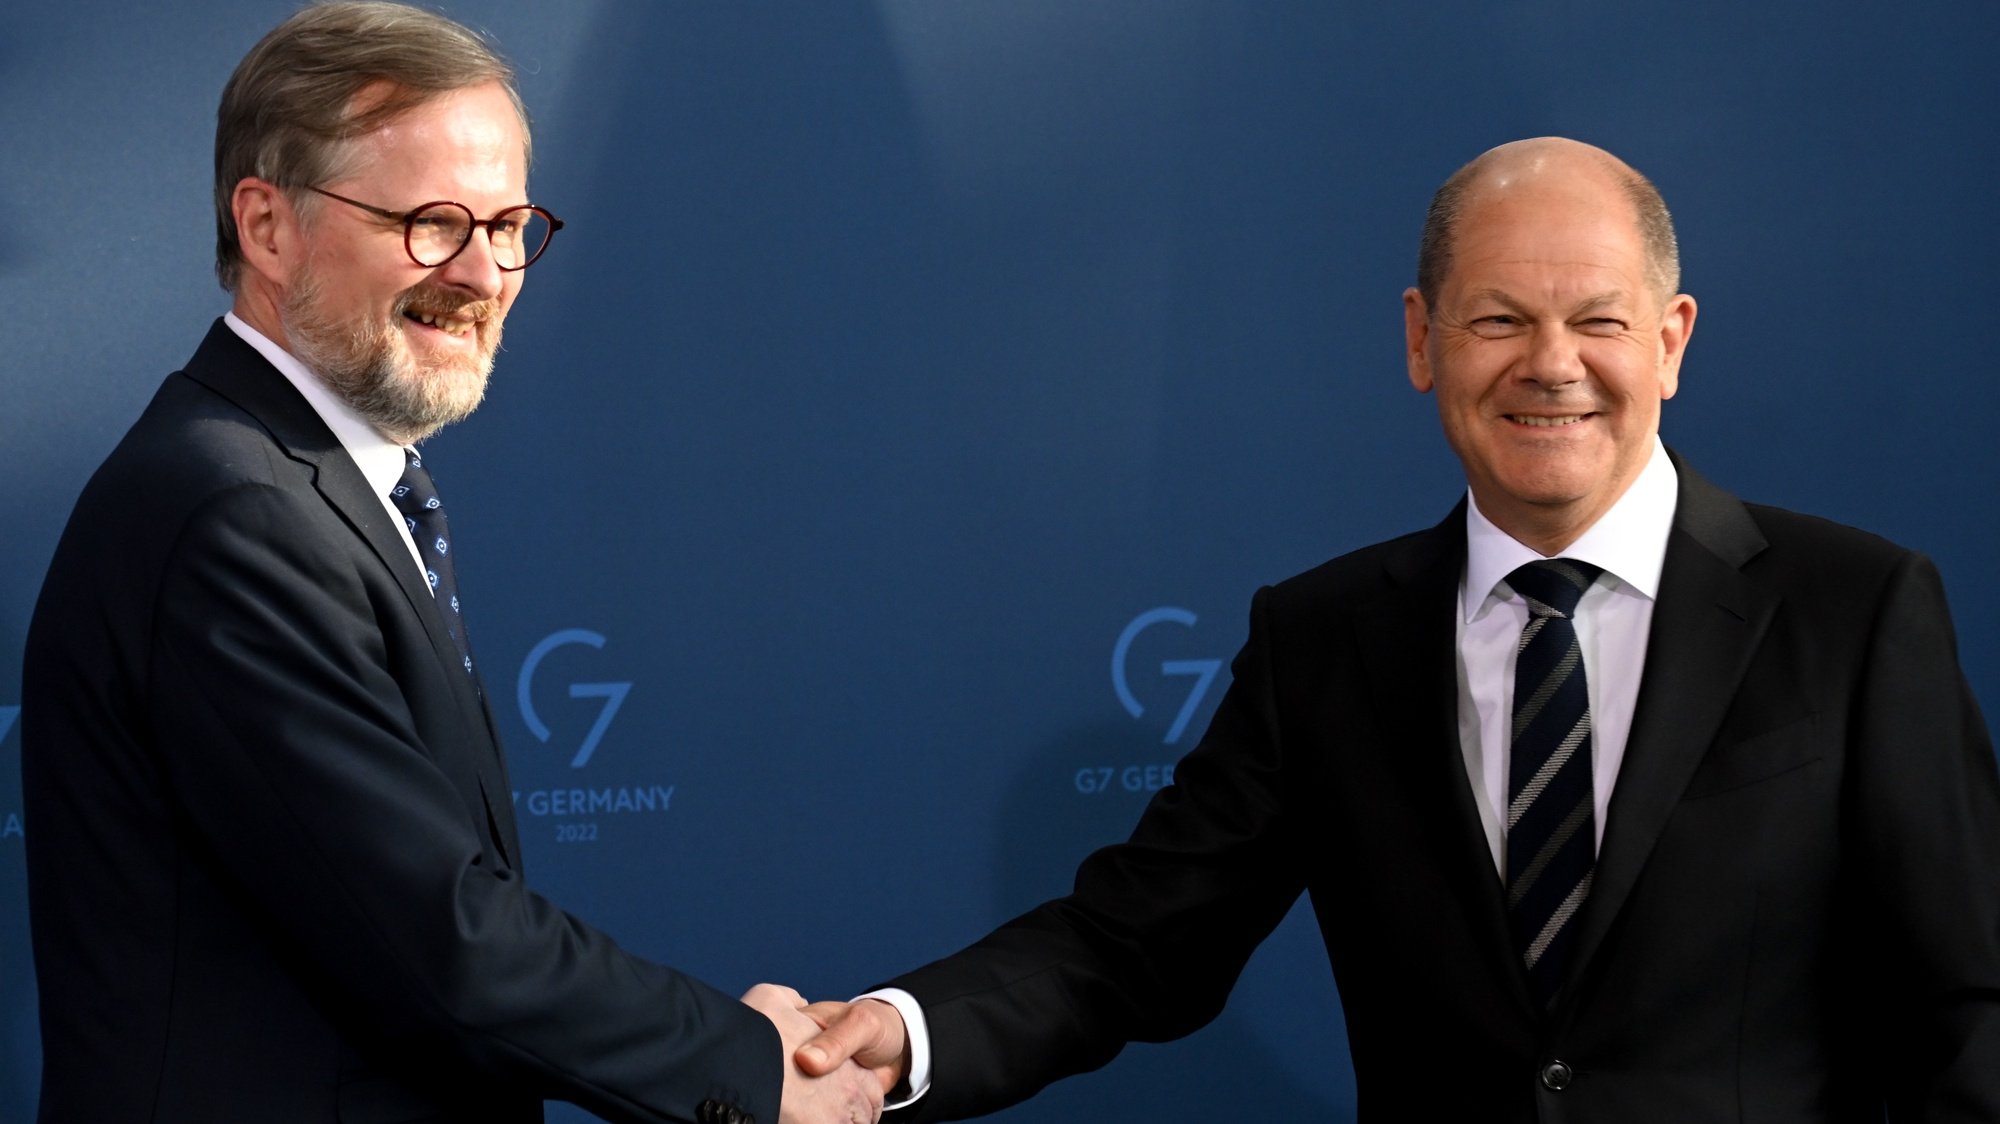 epa09928569 Czech Prime Minister Petr Fiala (L) and German Chancellor Olaf Scholz shake hands after a press conference at the Chancellery in Berlin, Germany, 05 May 2022.  EPA/FILIP SINGER